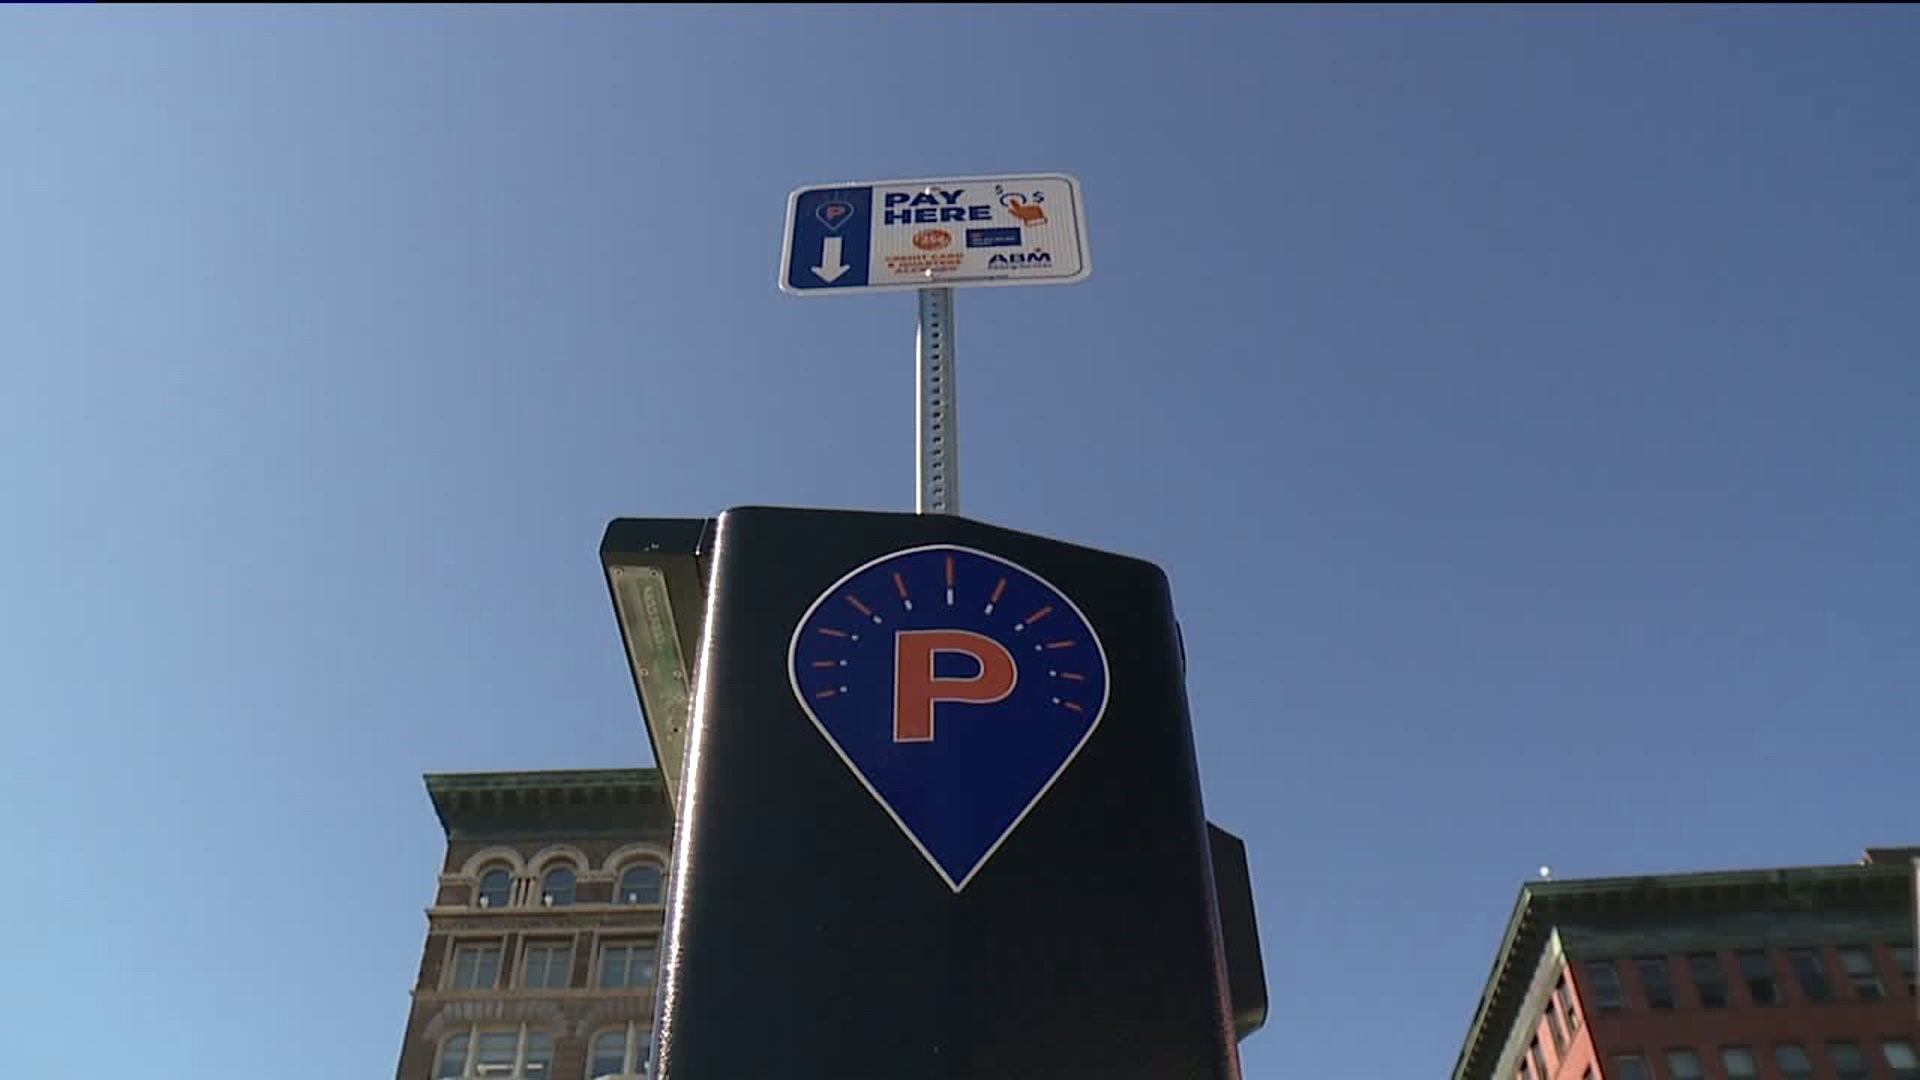 New Way to Pay for Parking in Scranton